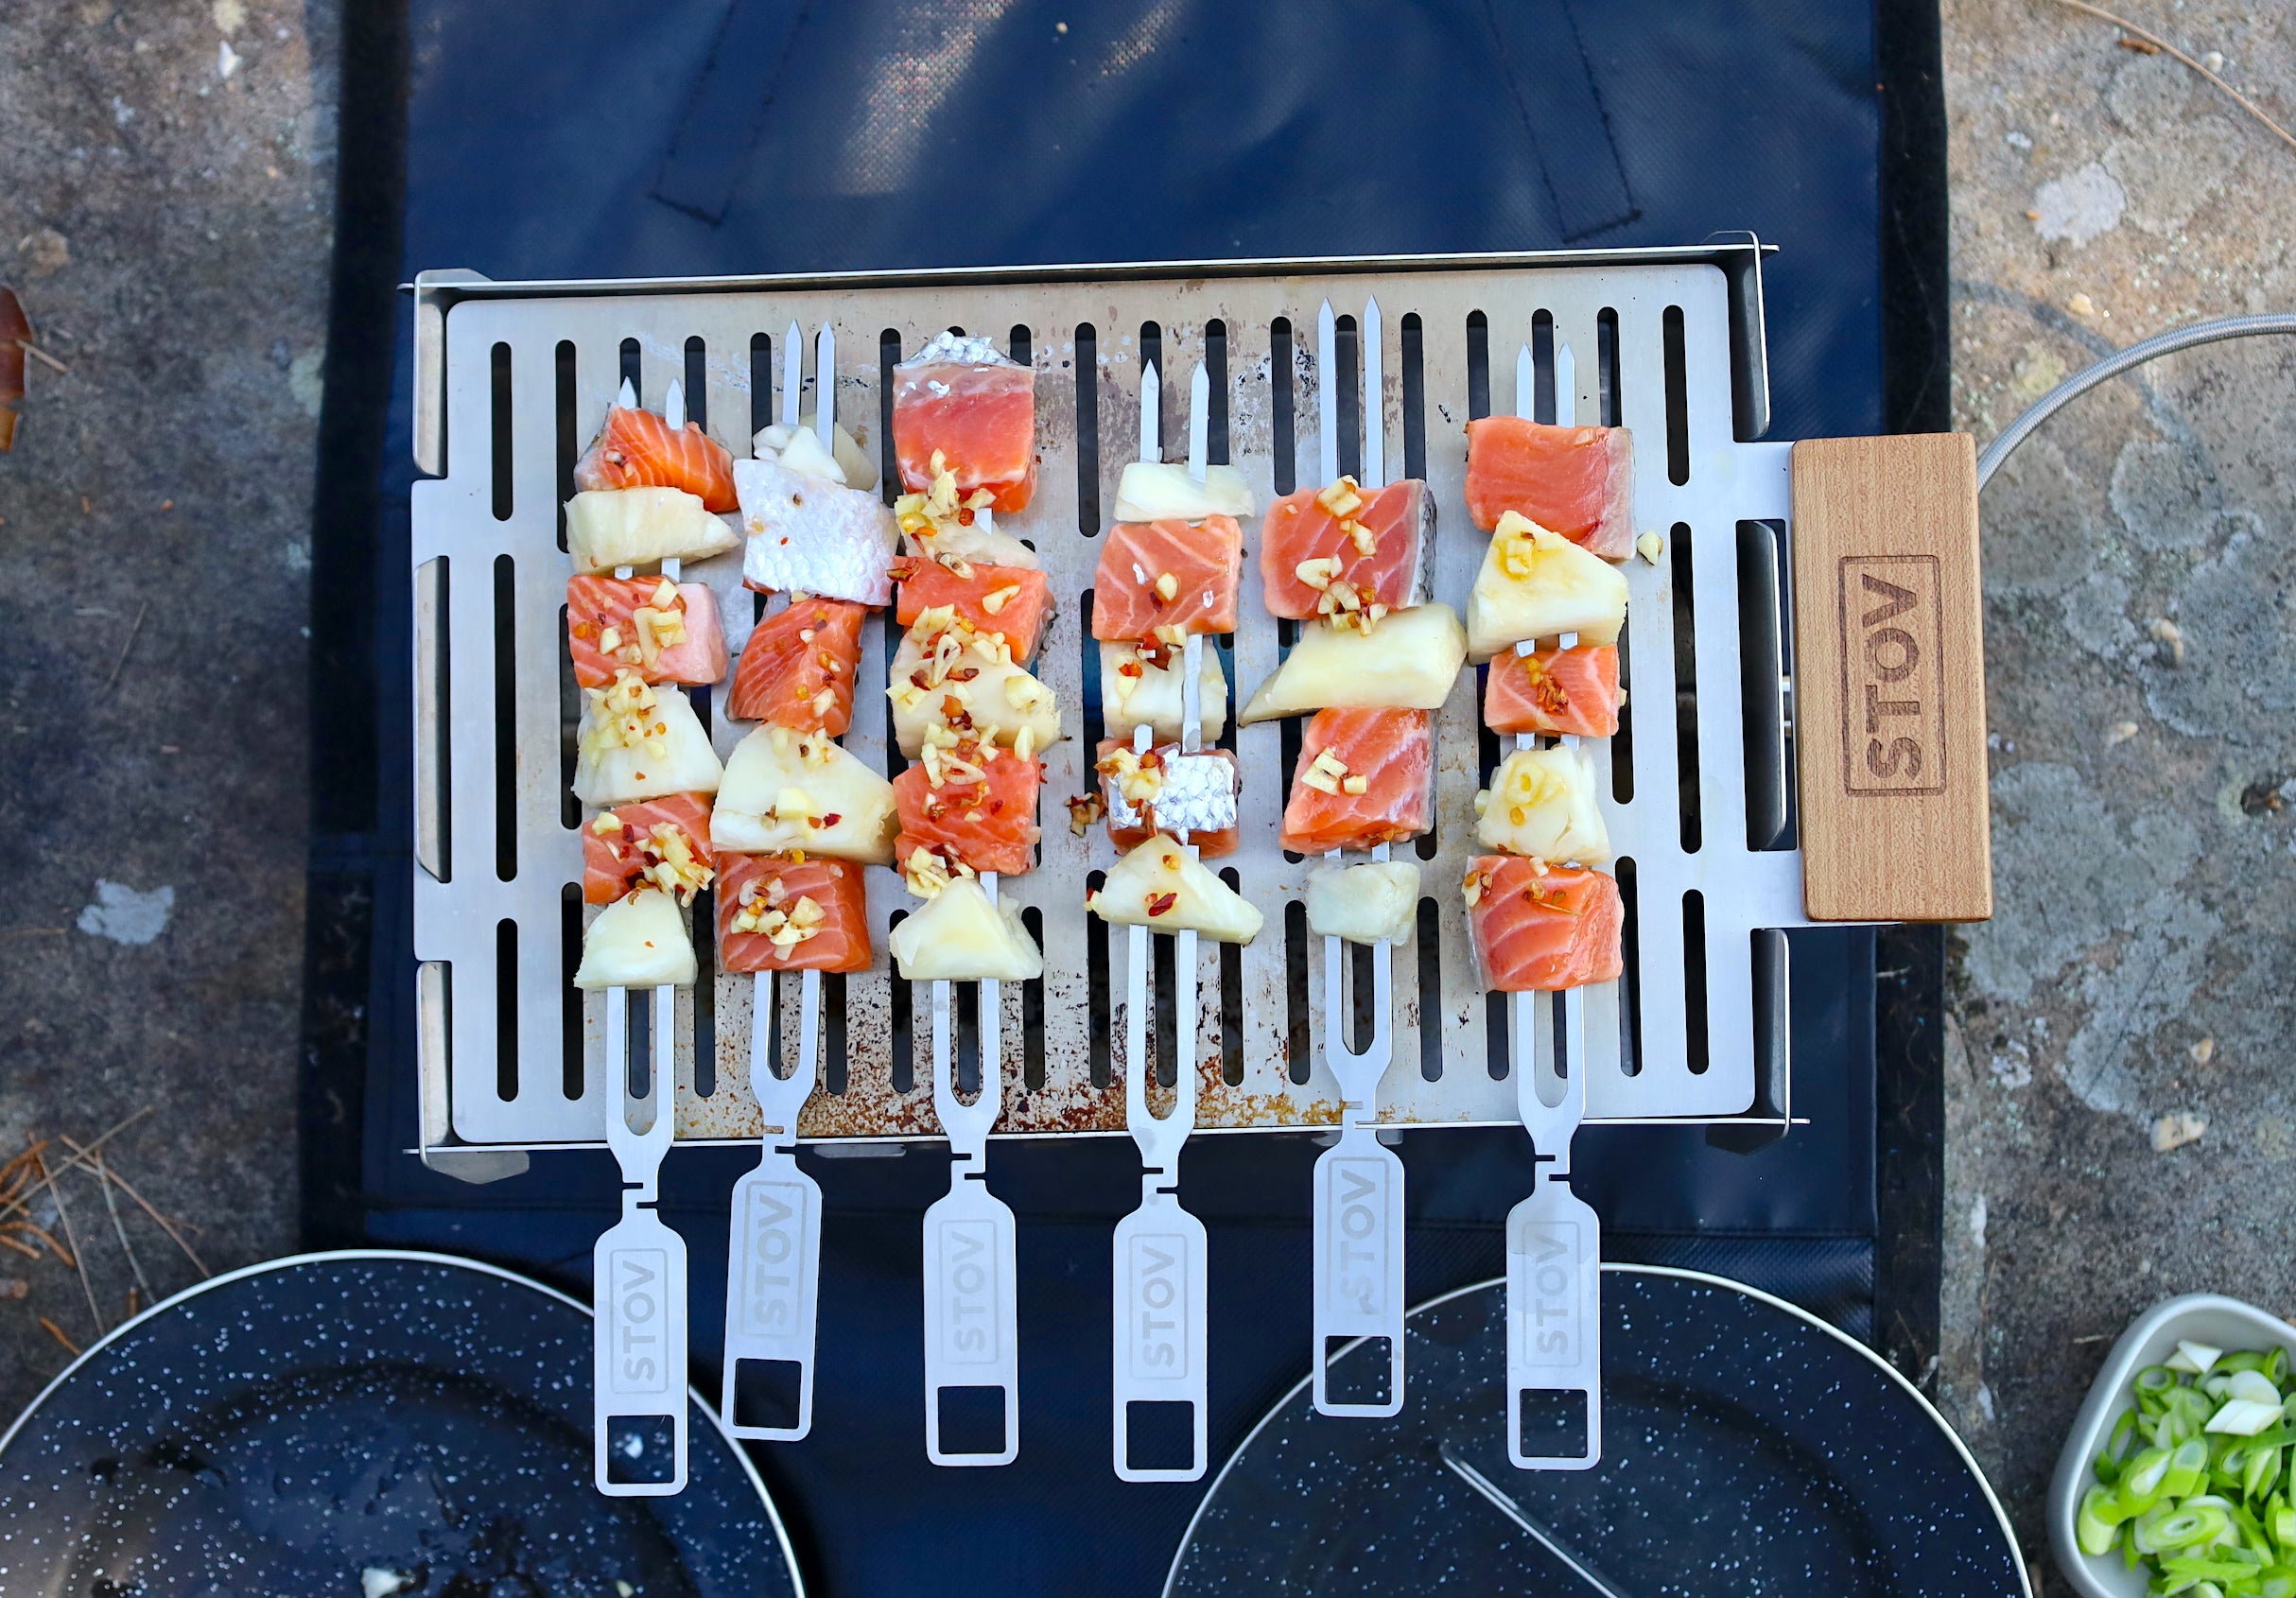 Check out our recipe for marinated salmon and pineapple grilled on the portable gas barbecue.